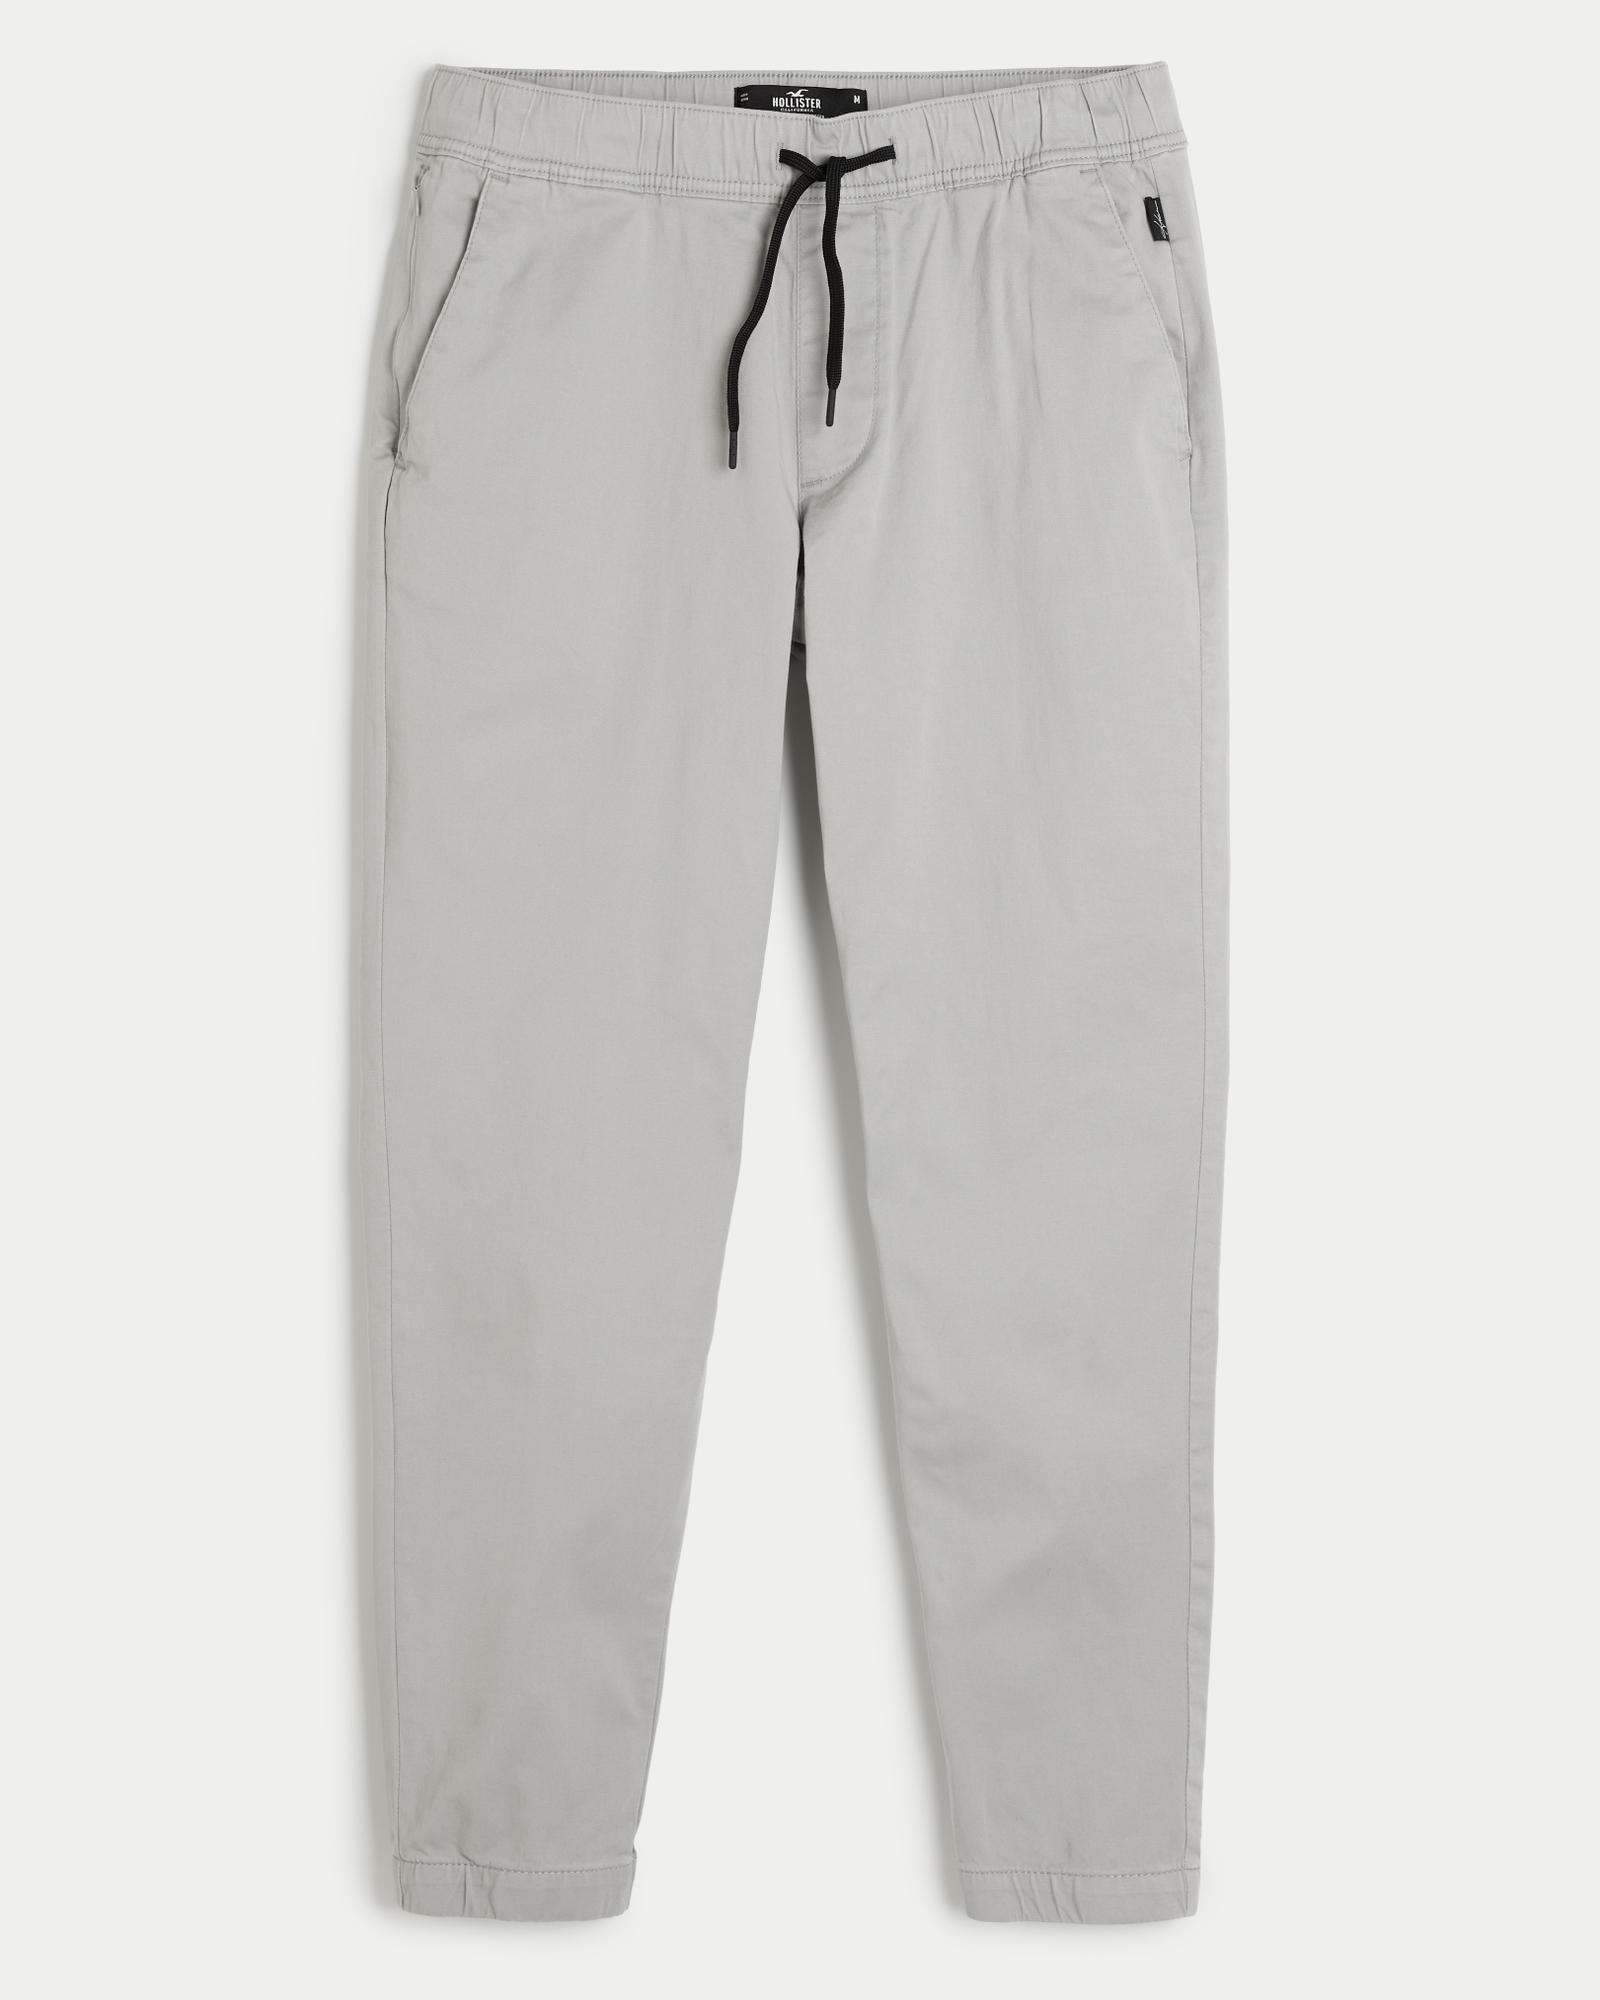 Hollister classic joggers